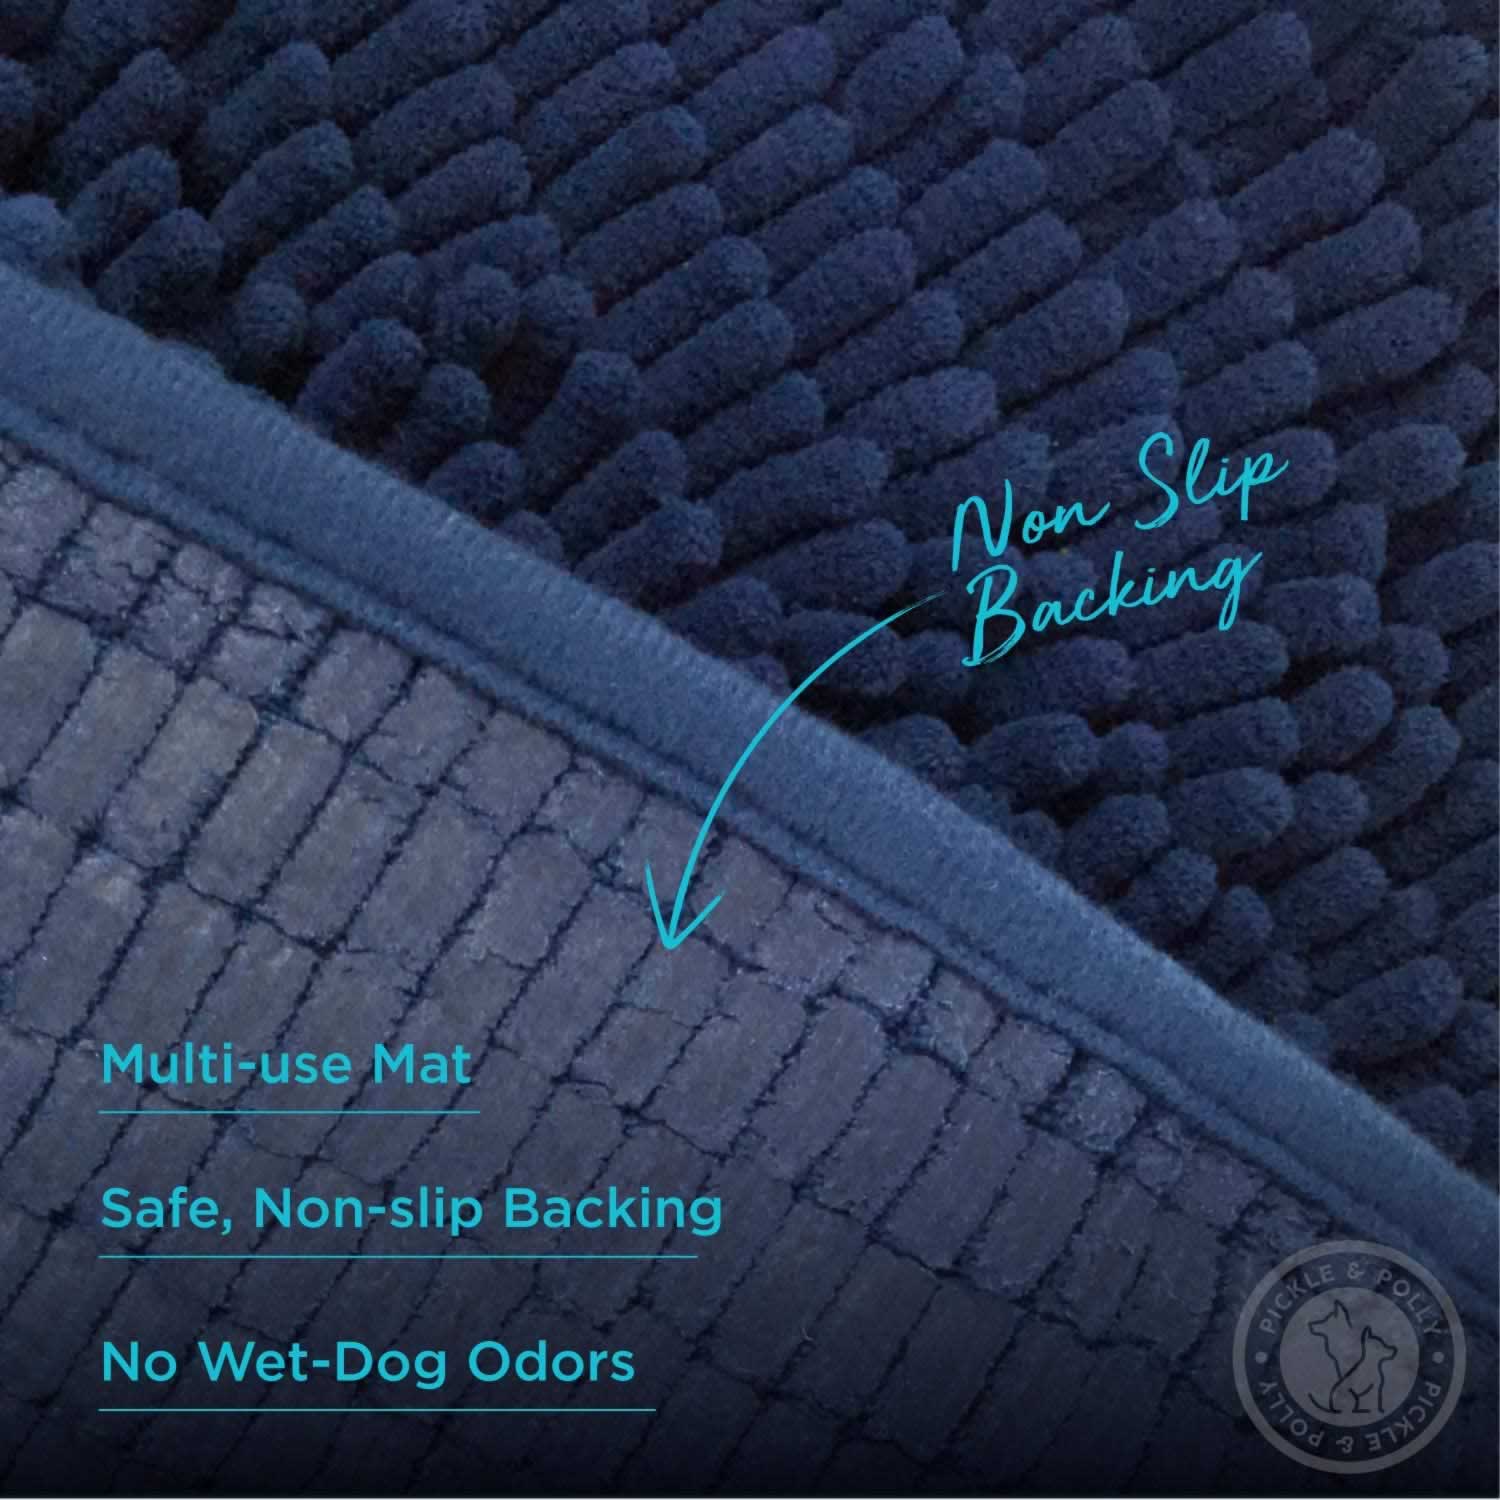 A close-up of the non-slip backing on a Pickle & Polly Microfiber Pet Mat. The text reads, "Non Slip Backing. Multi Use Mat, Safe, Non-Slip Backing, No Wet-Dog Odors."